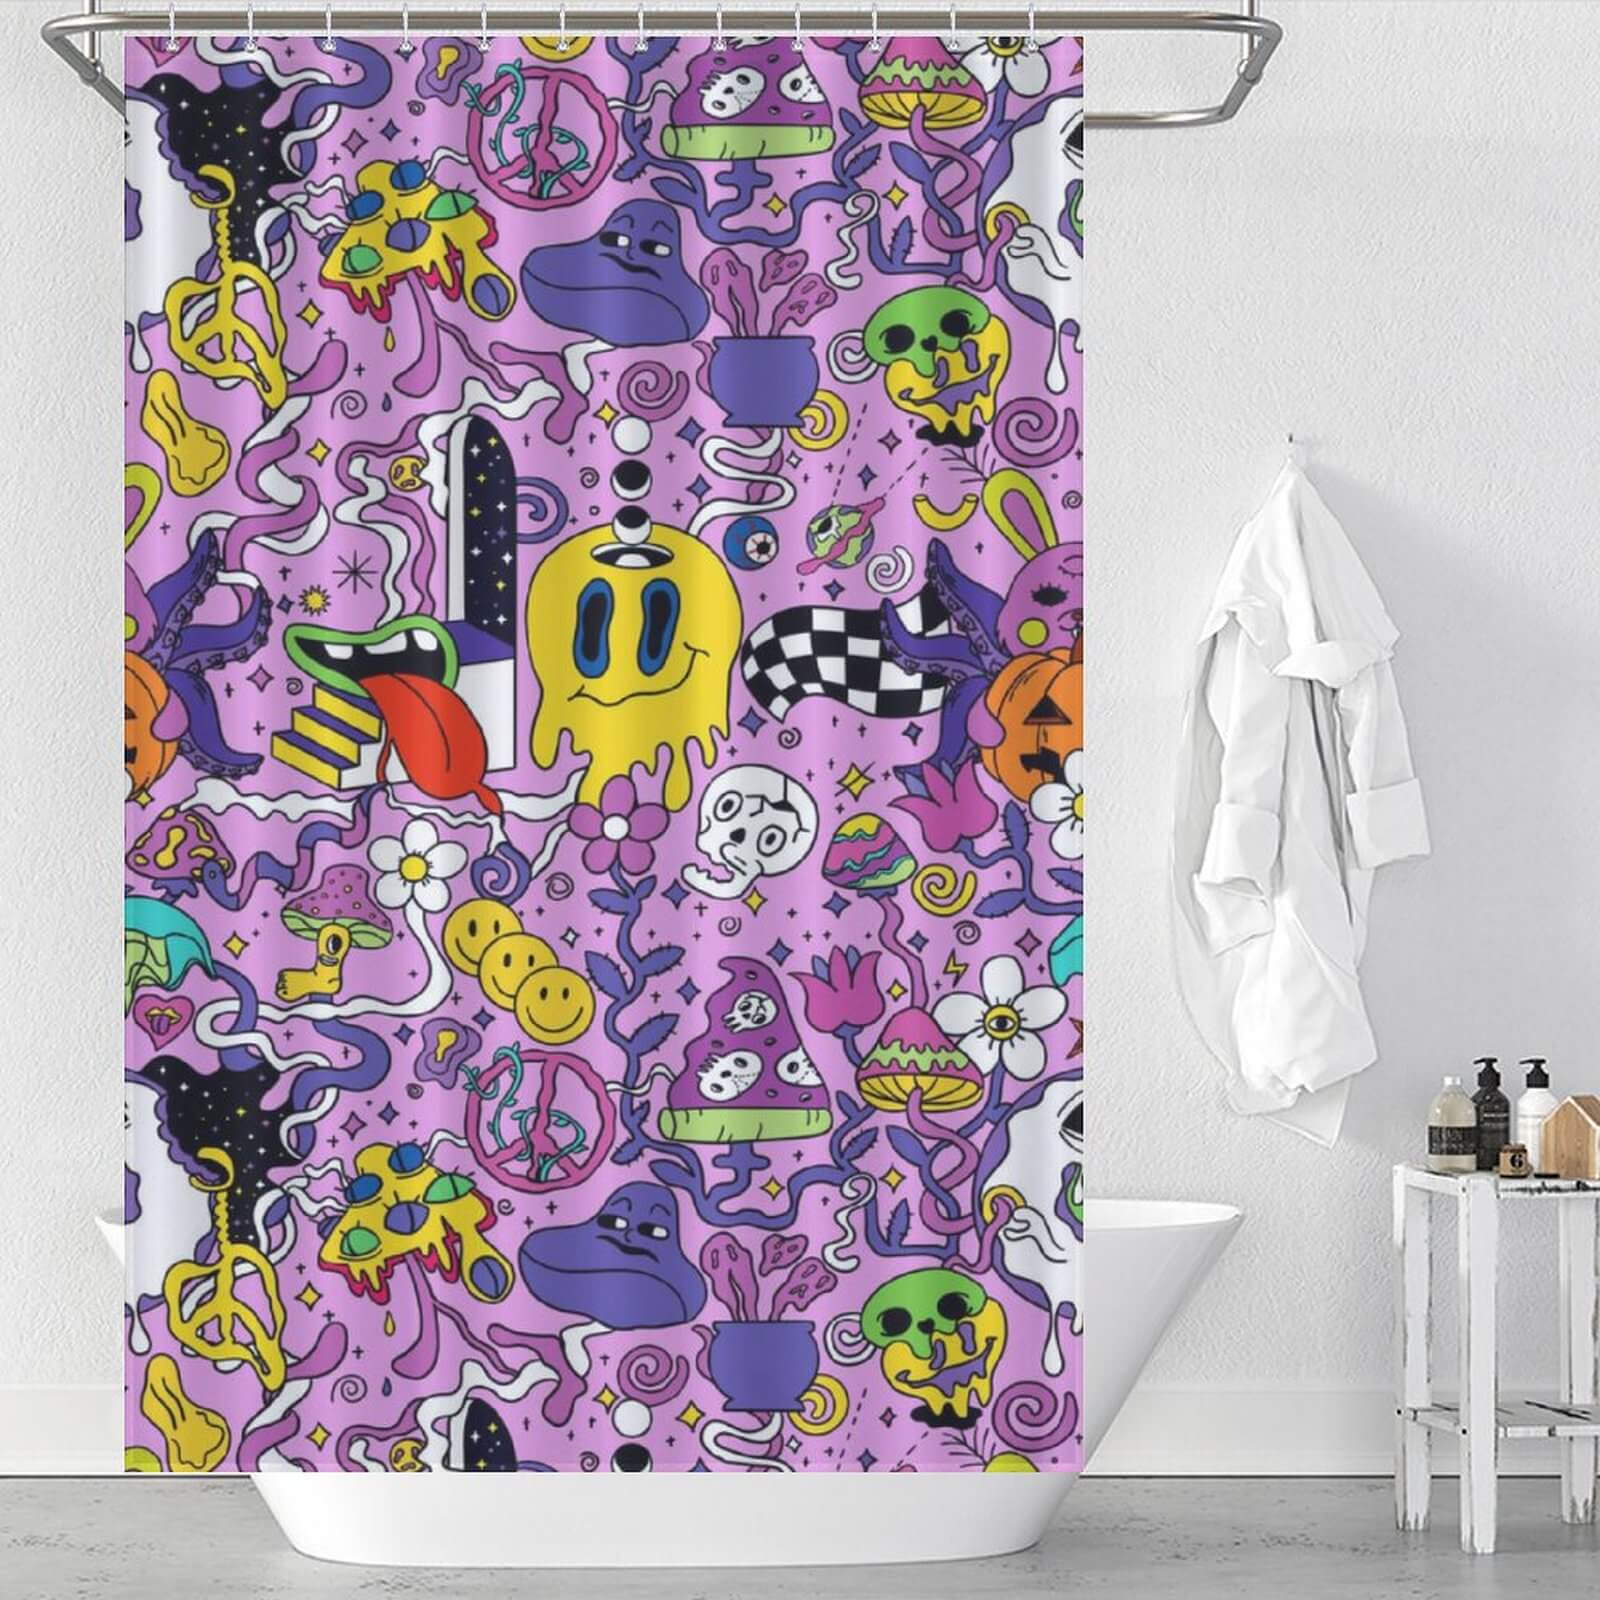 A Psychedelic Trippy Shower Curtain with a cartoon character design by Cotton Cat.